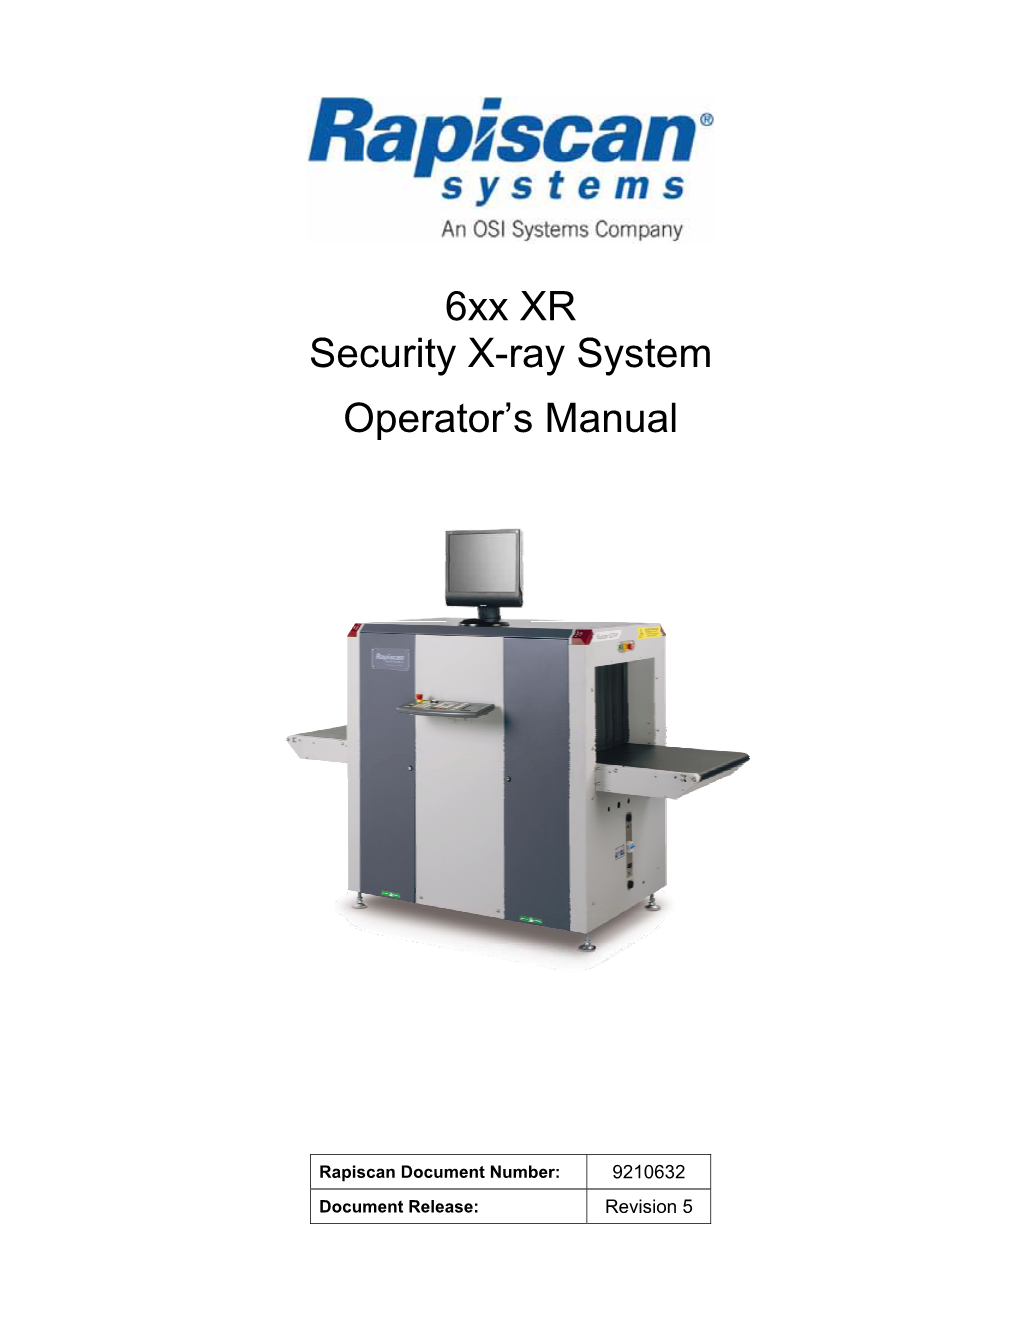 Rapiscan 6Xx XR Security X-Ray System Operator's Manual